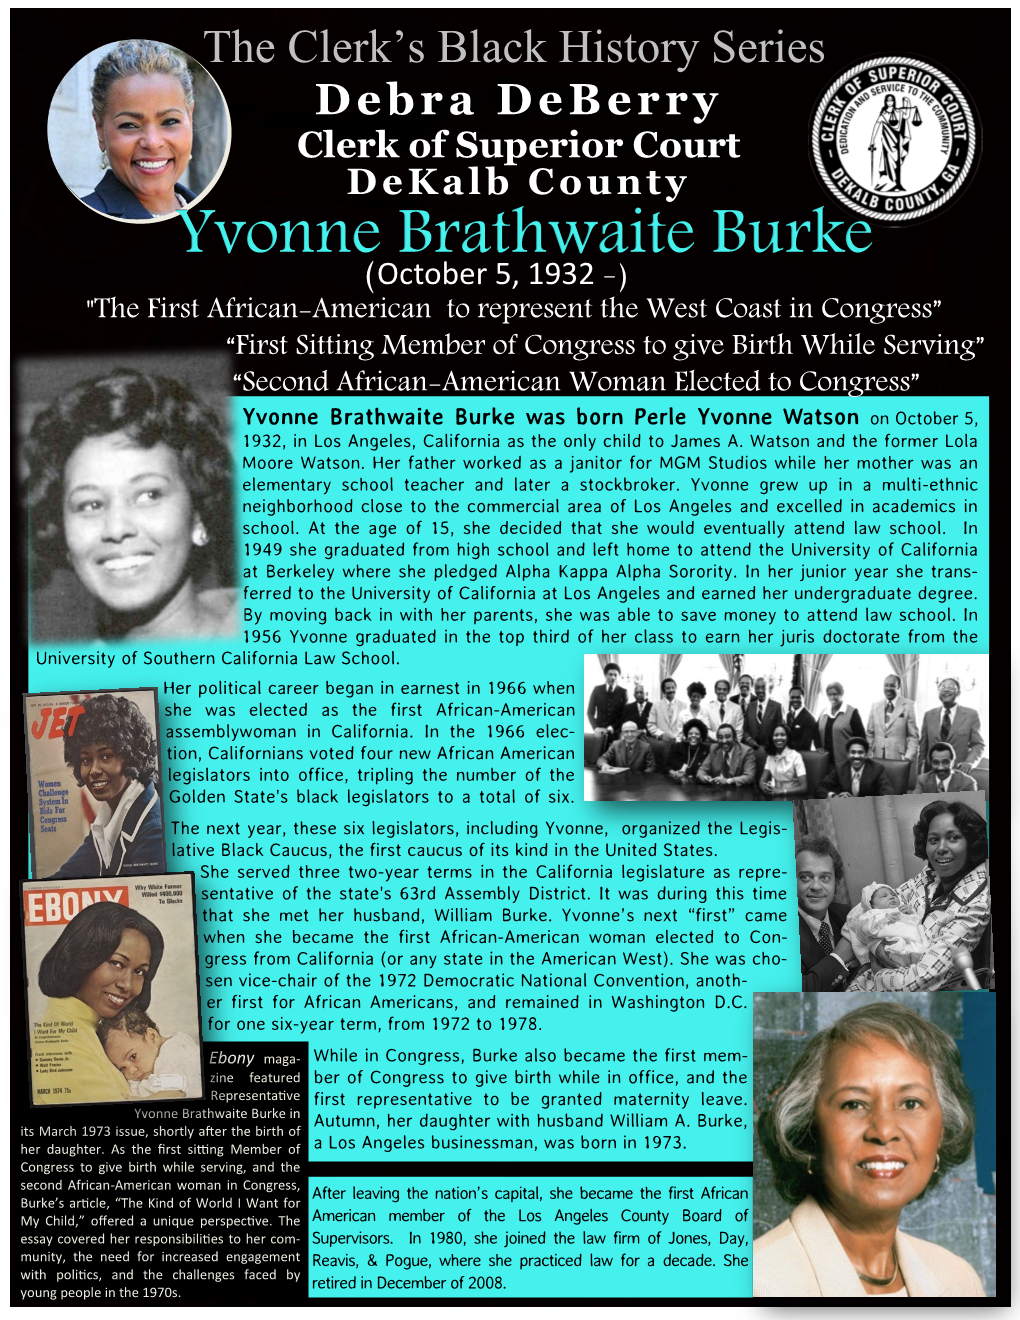 Yvonne Brathwaite Burke Was Born Perle Yvonne Watson on October 5, 1932, in Los Angeles, California As the Only Child to James A